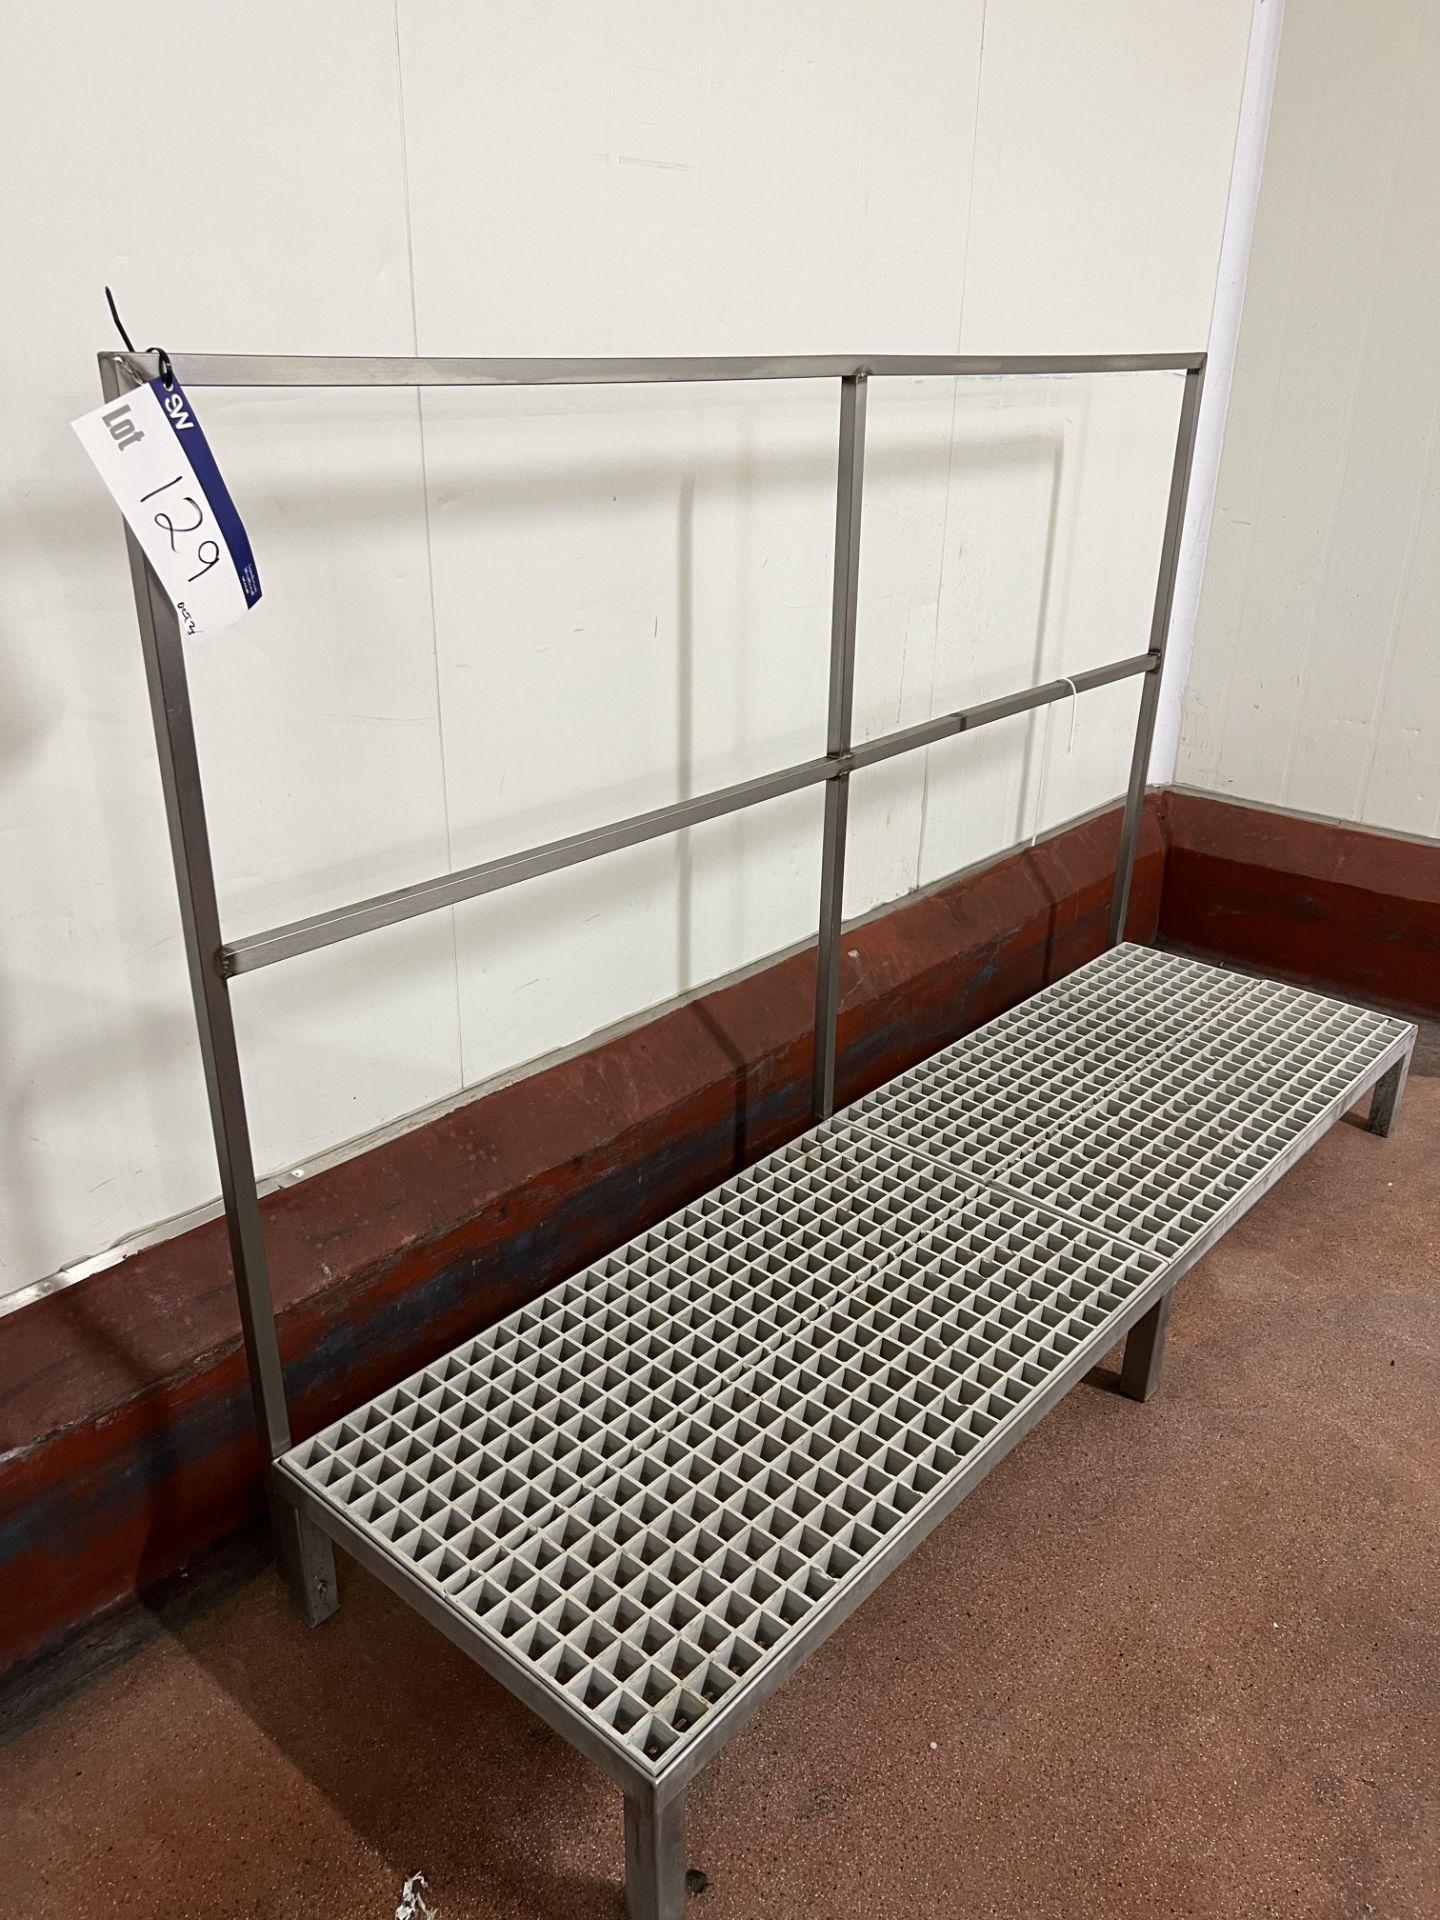 Stand 23cm Off Floor, approx. 2m x 0.6m overall, rail 1.35m high Please read the following important